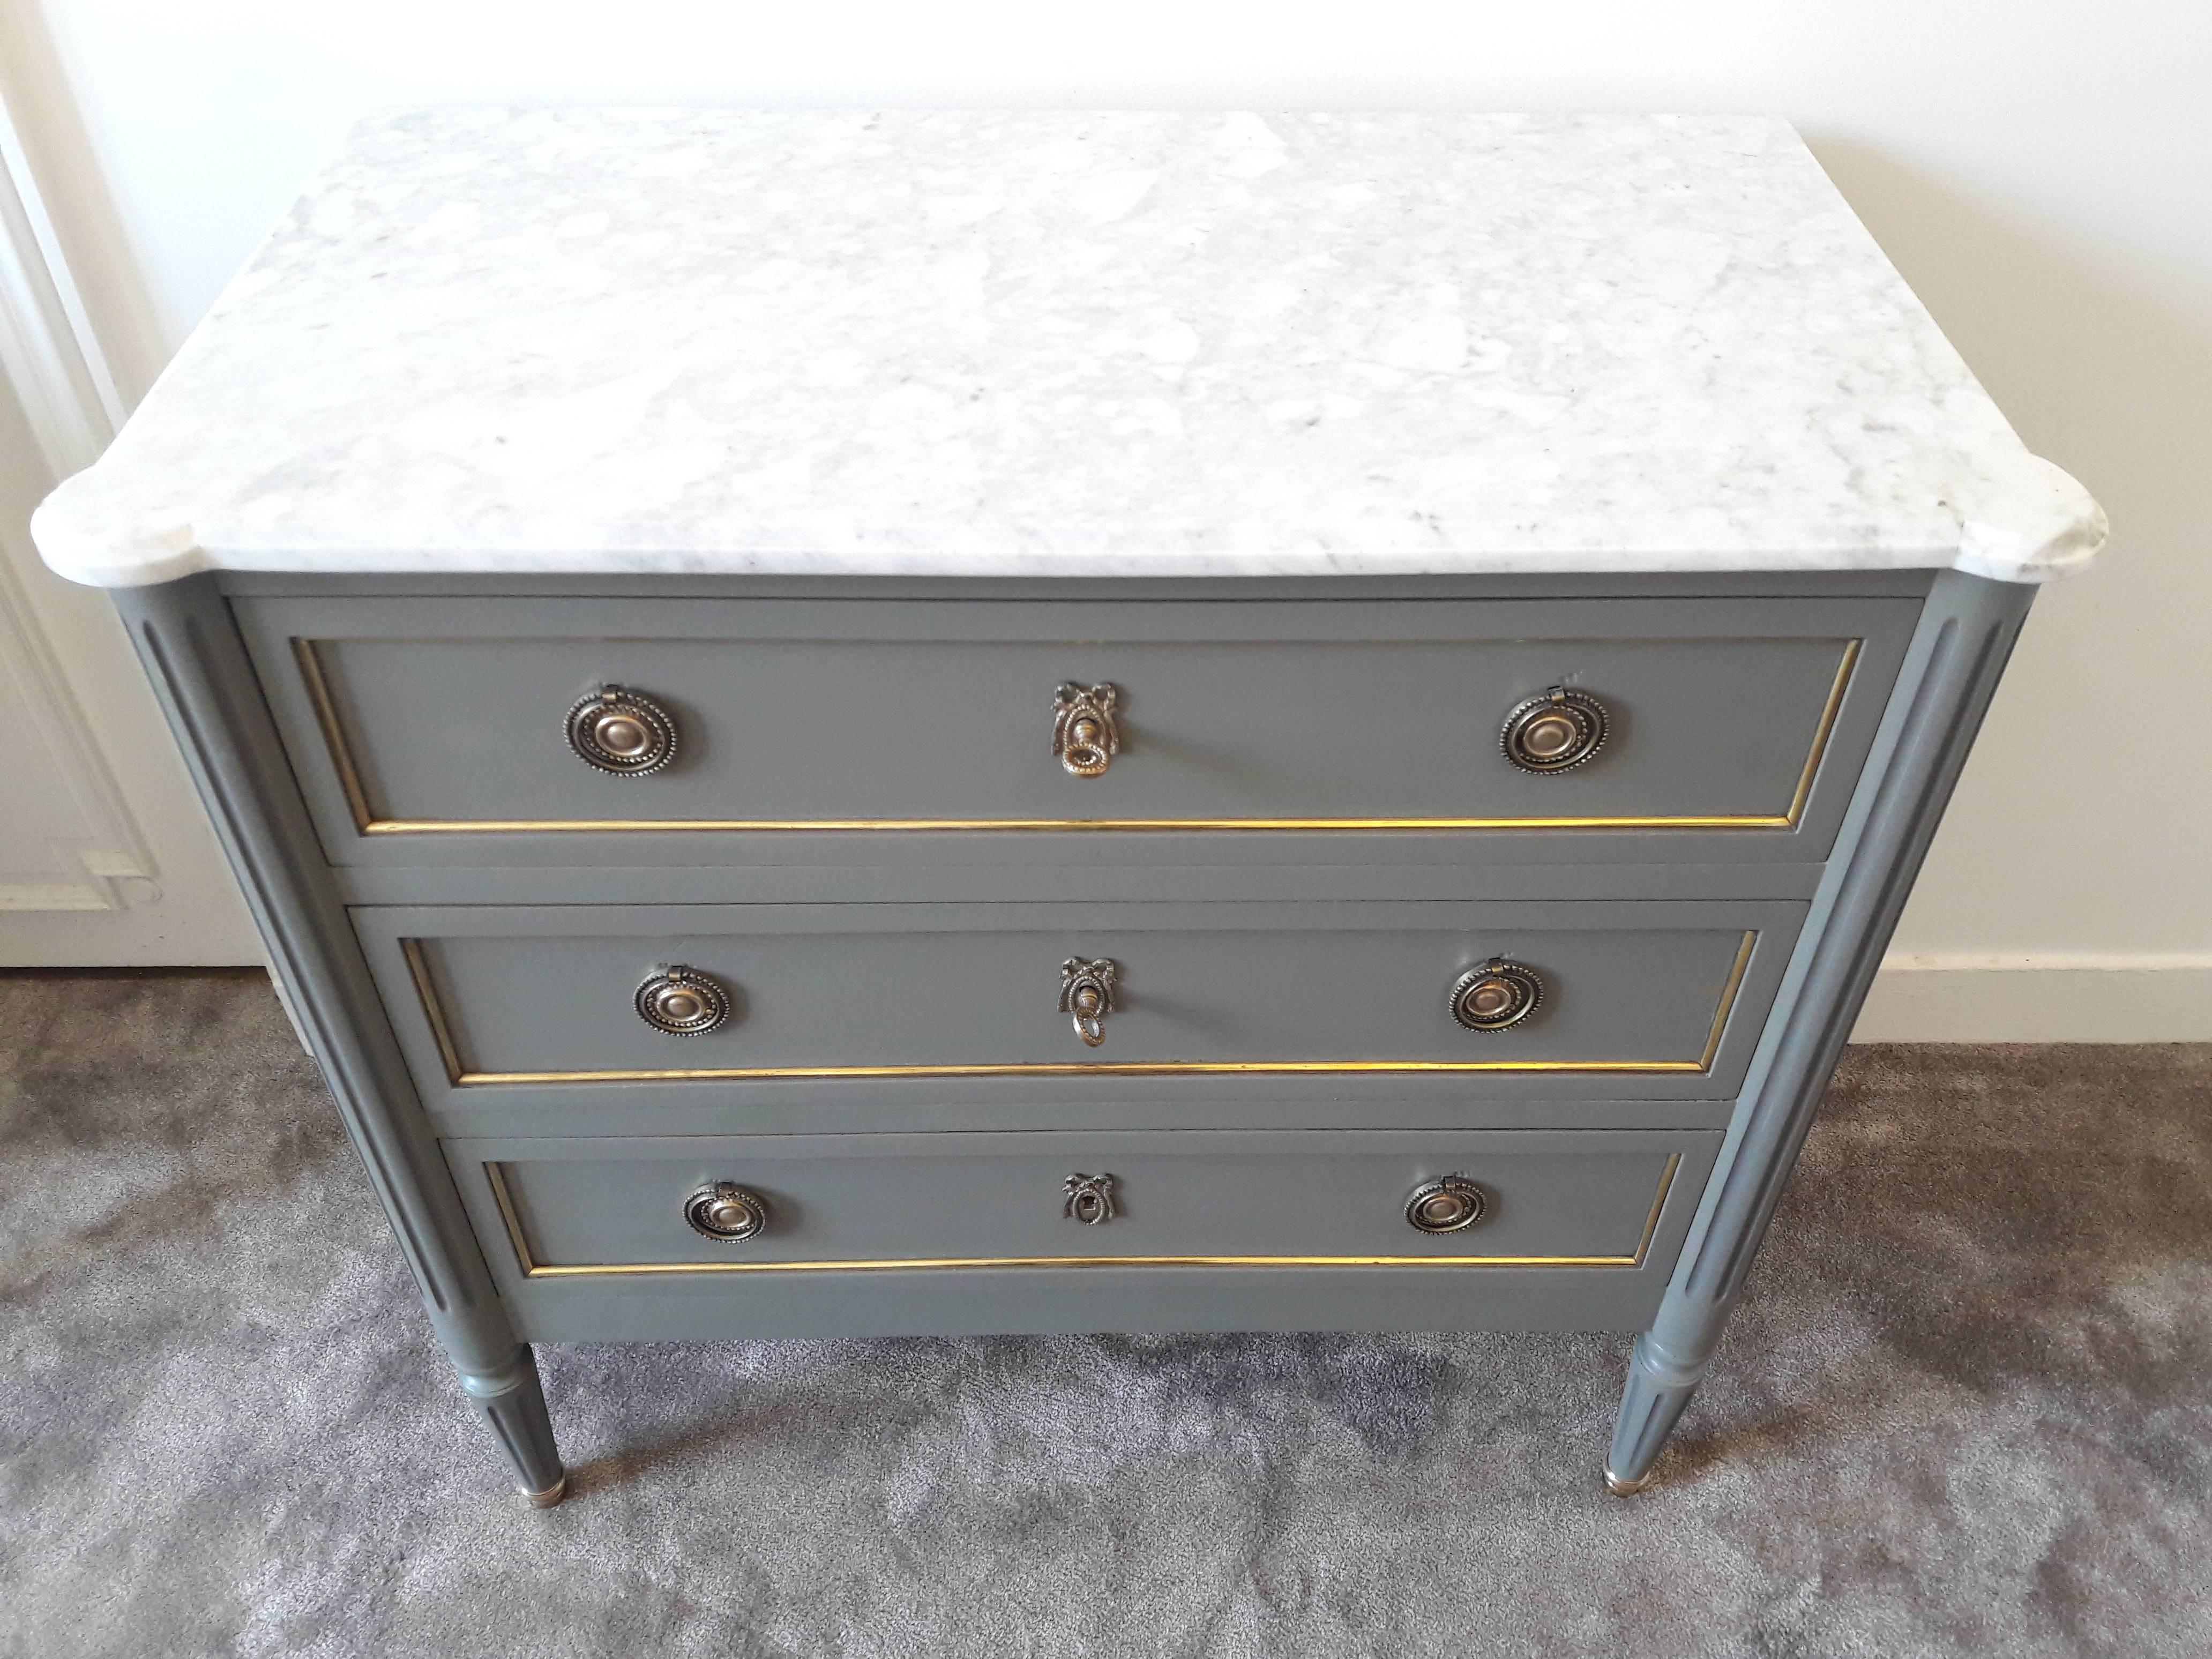 Antique French, Louis XVI style chest of drawers topped with a white Carrara marble, fluted legs finished with golden bronze clogs. 
Three dovetailed drawers with brass details, and three keys.